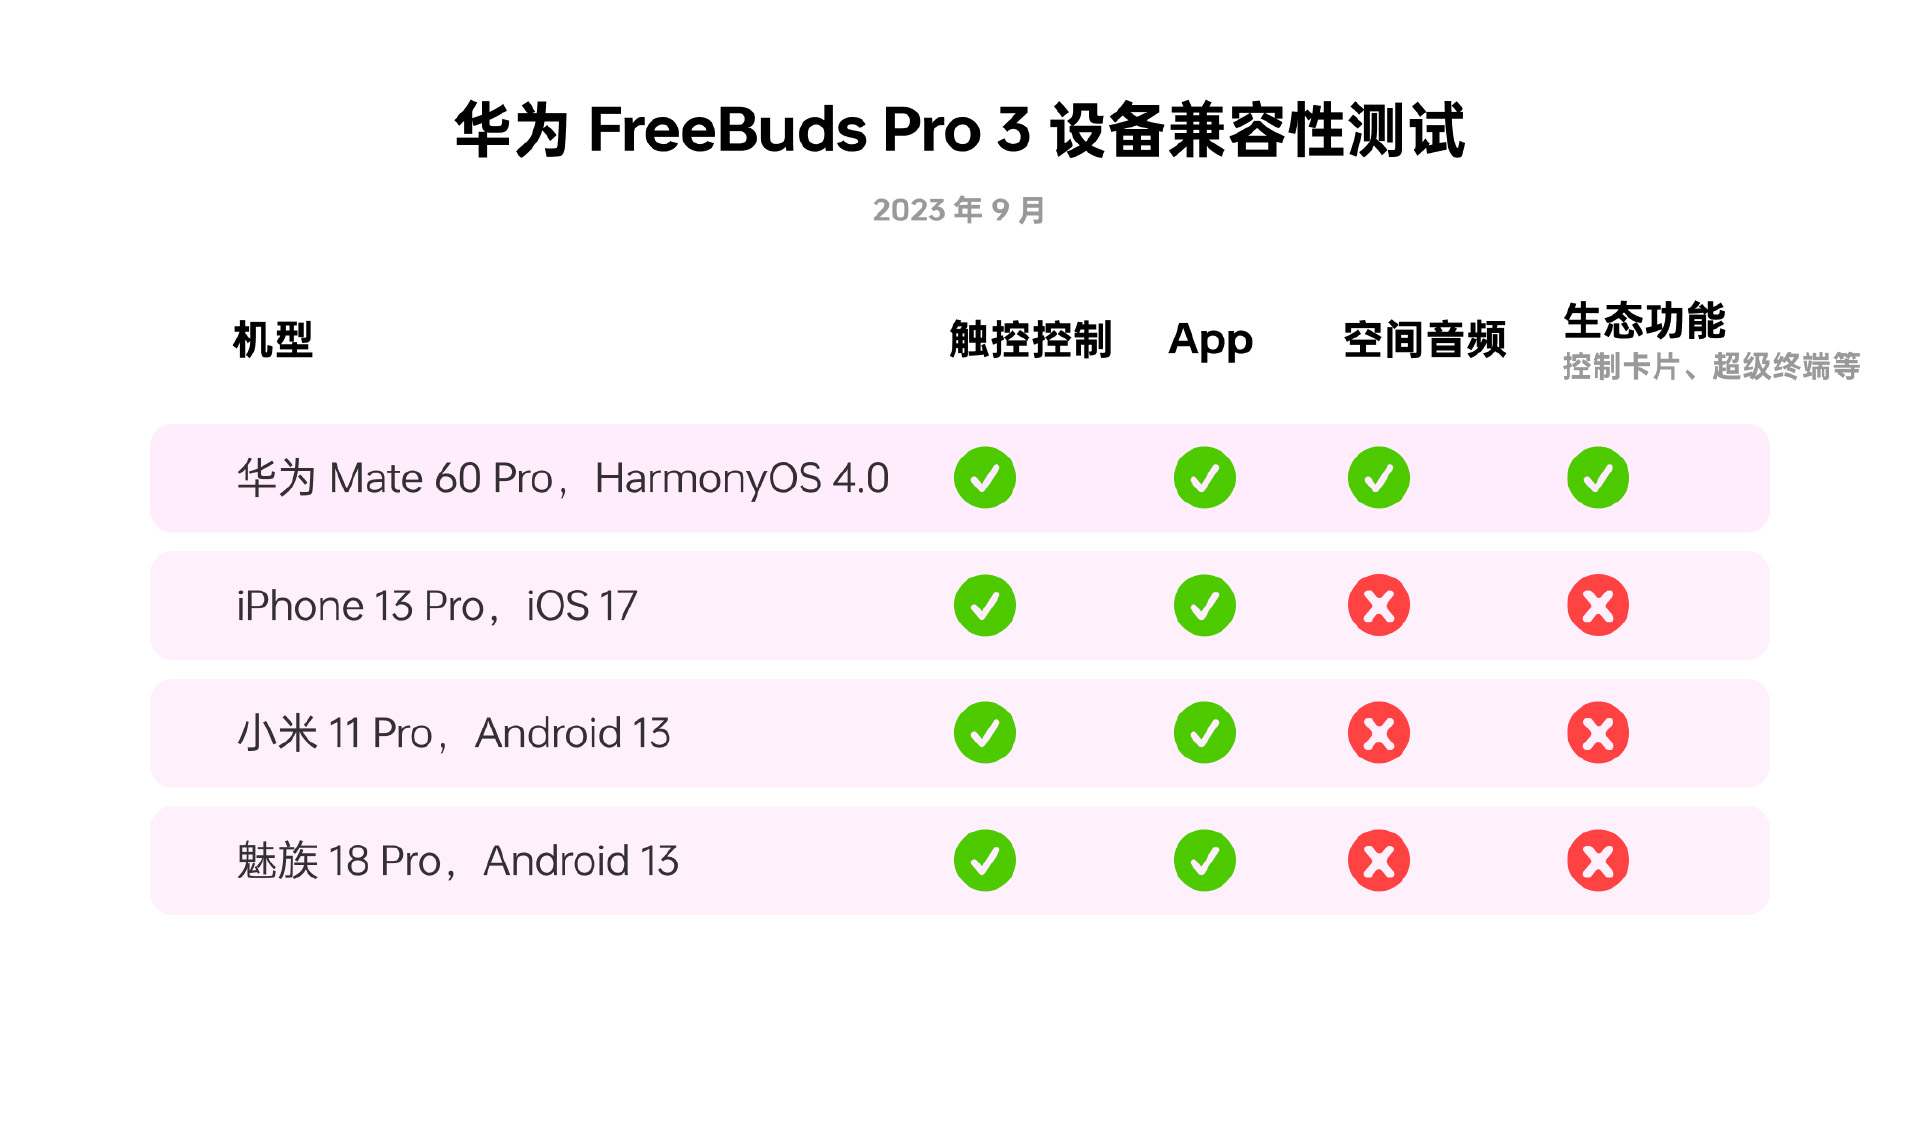 Huawei FreeBuds Pro 3 With Kirin A2 Chip Take Audio Experience To The Next  Level